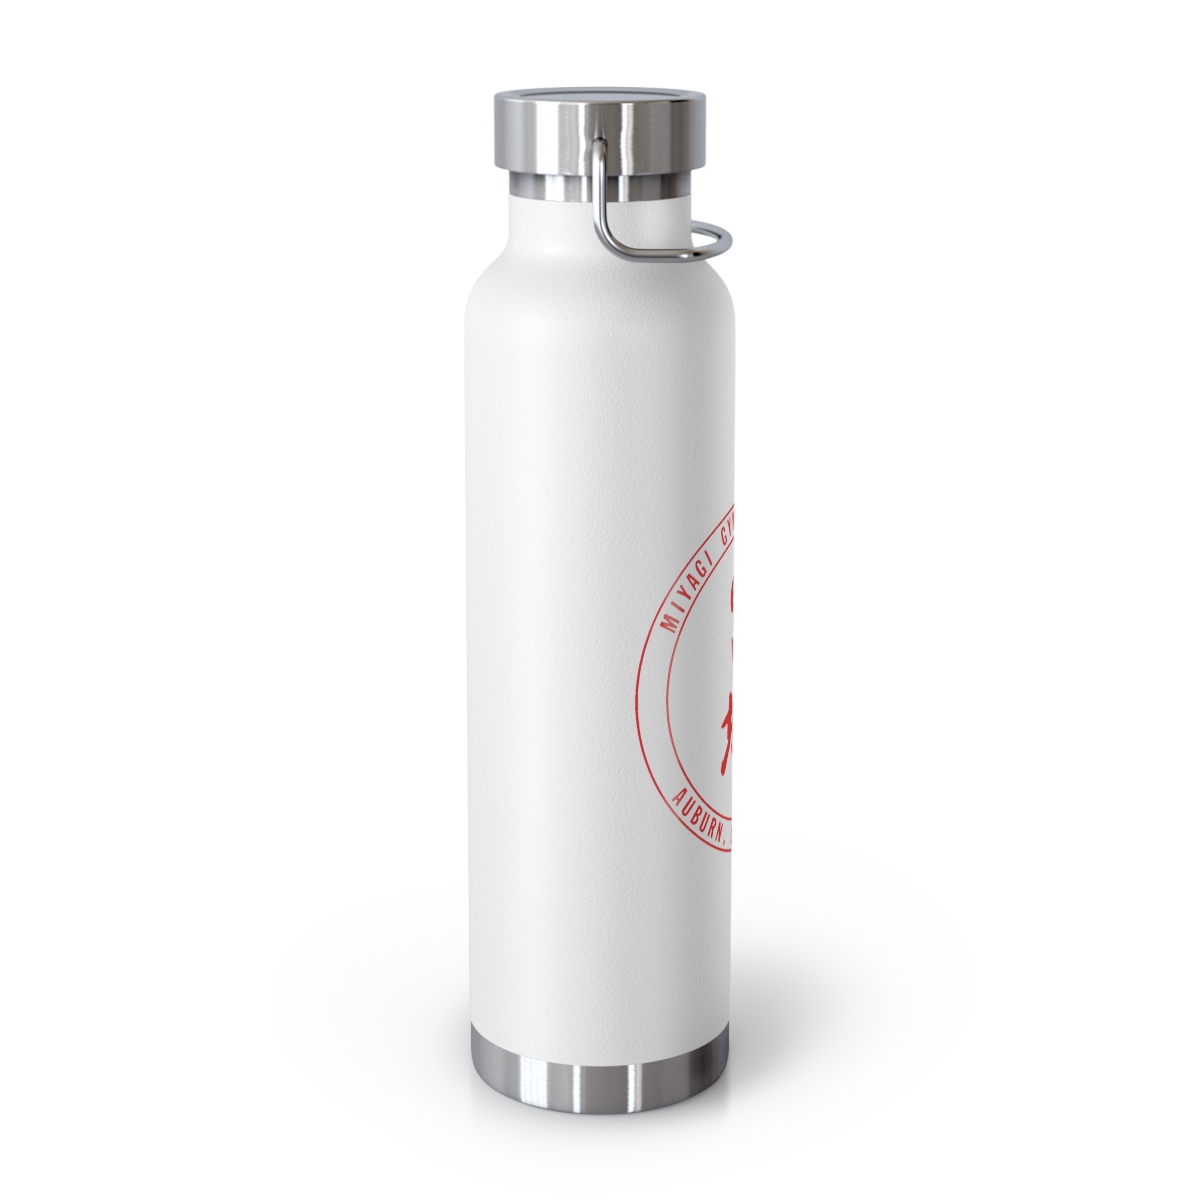 Avion 12 Oz. Vacuum Insulated Copper-Coated Stainless Steel Bottle